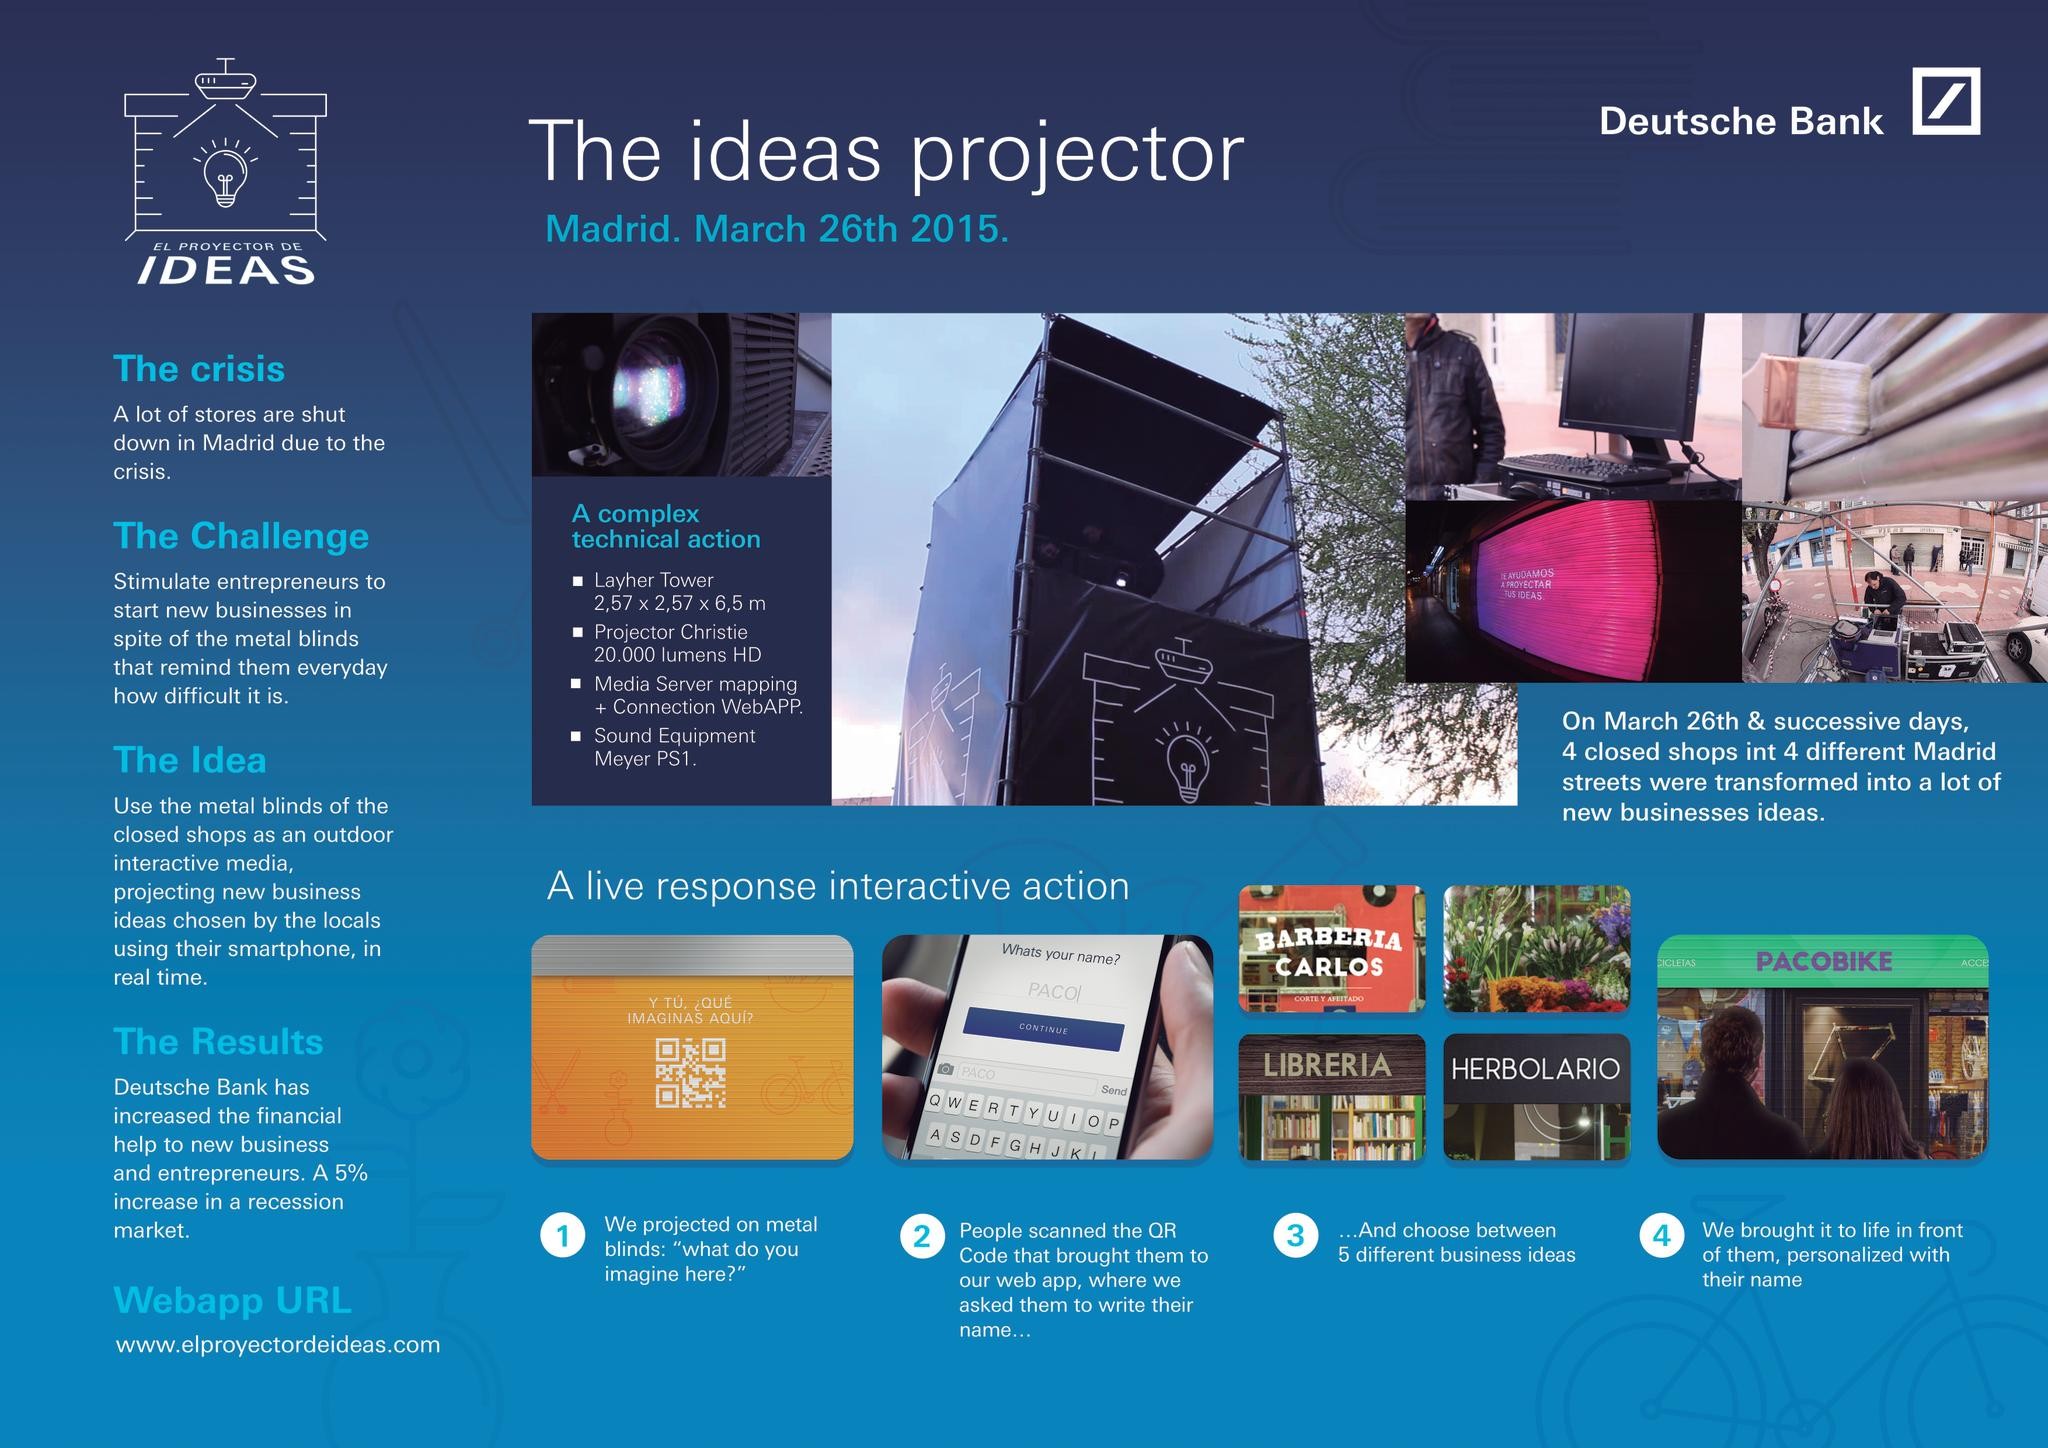 THE IDEAS PROJECTOR